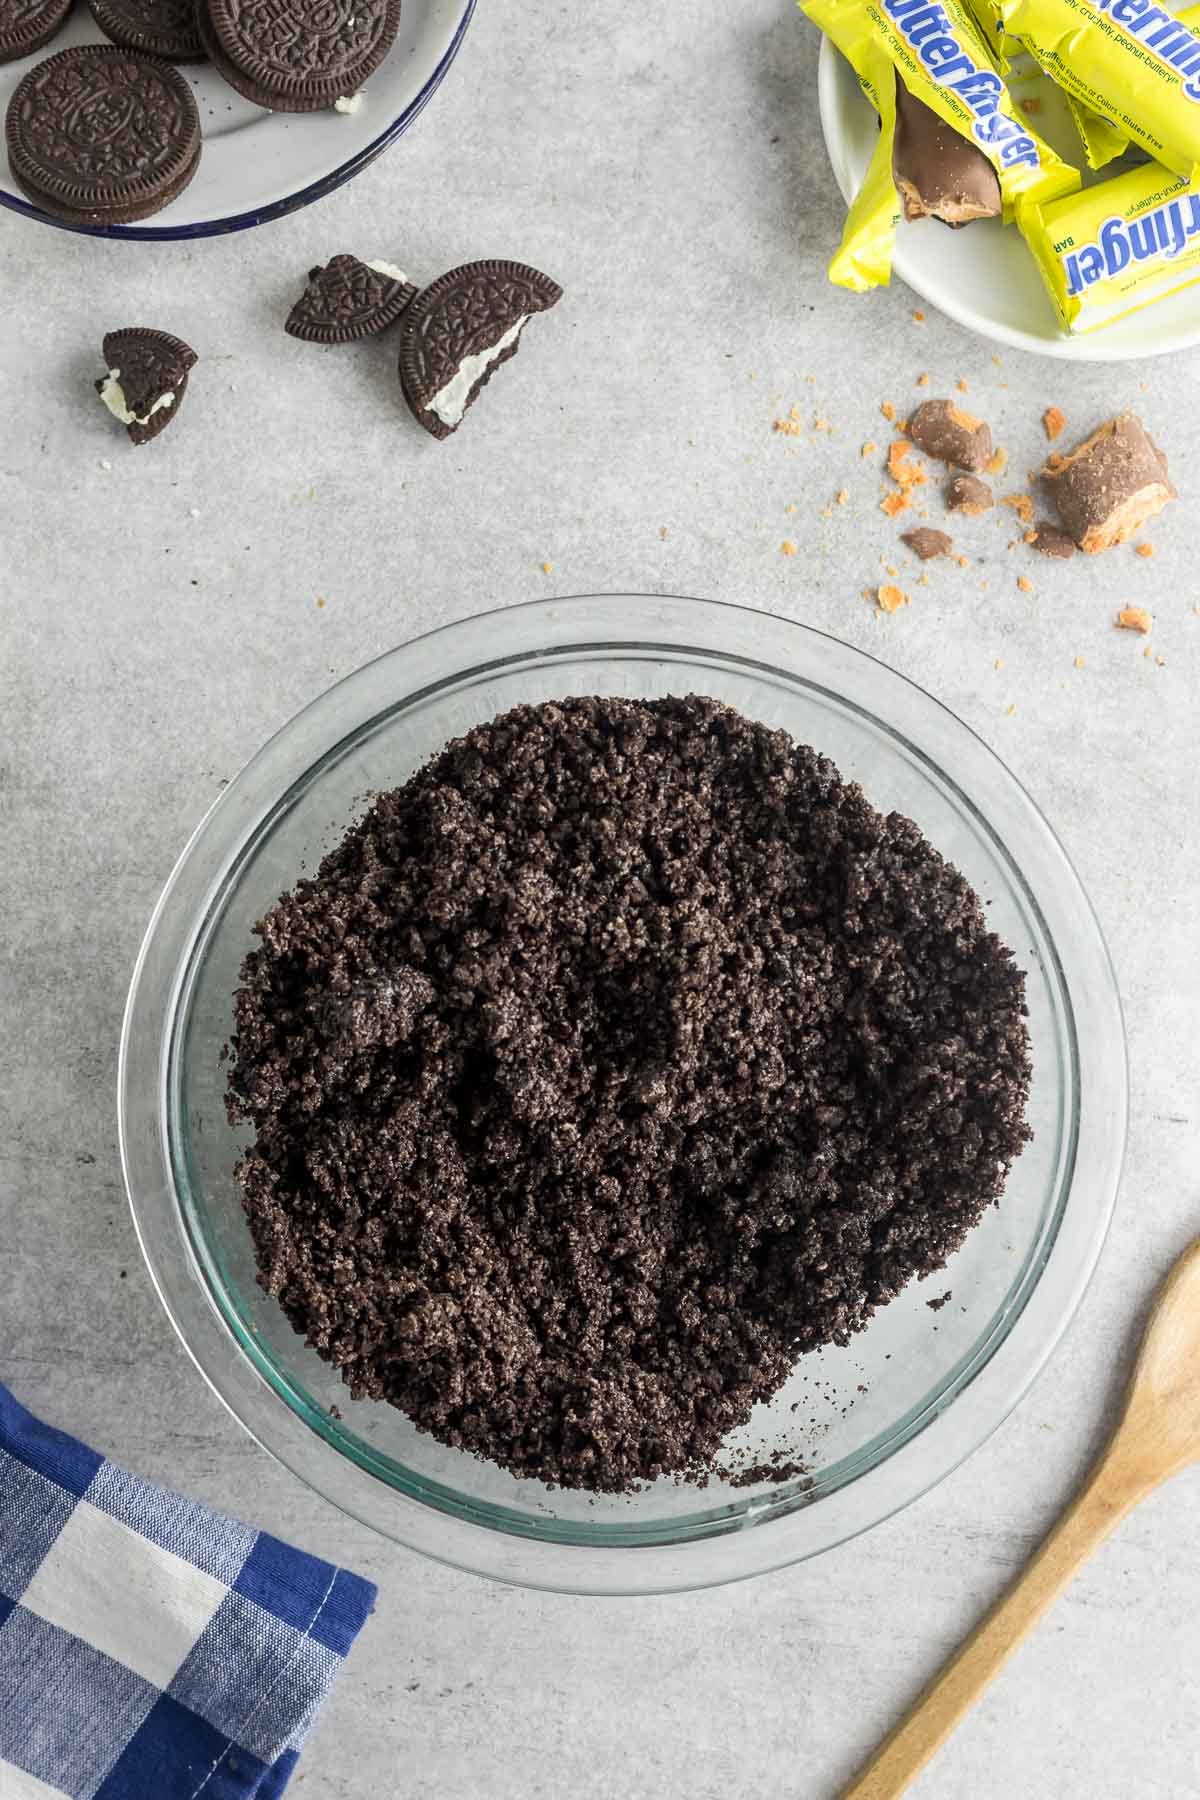 oreo cookie crust mixture in a glass mixing bowl